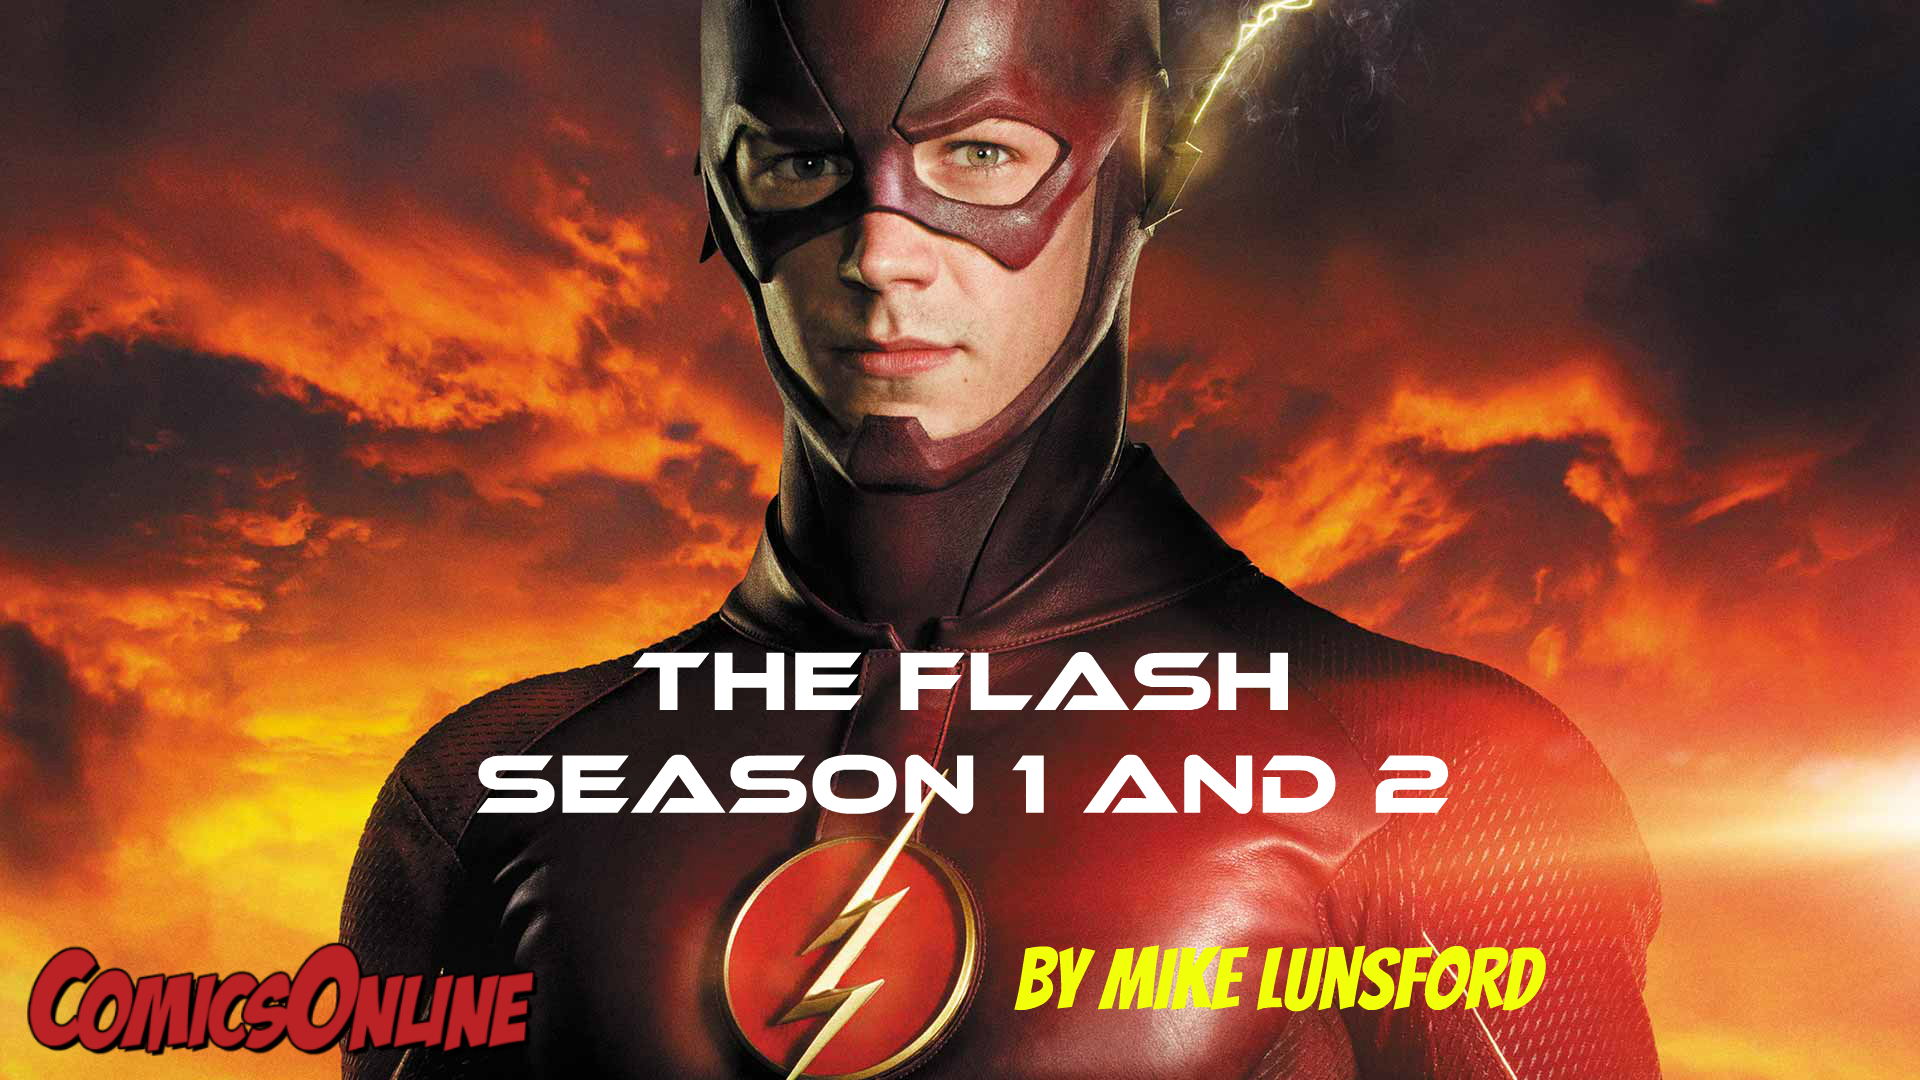 The flash s03 torrent